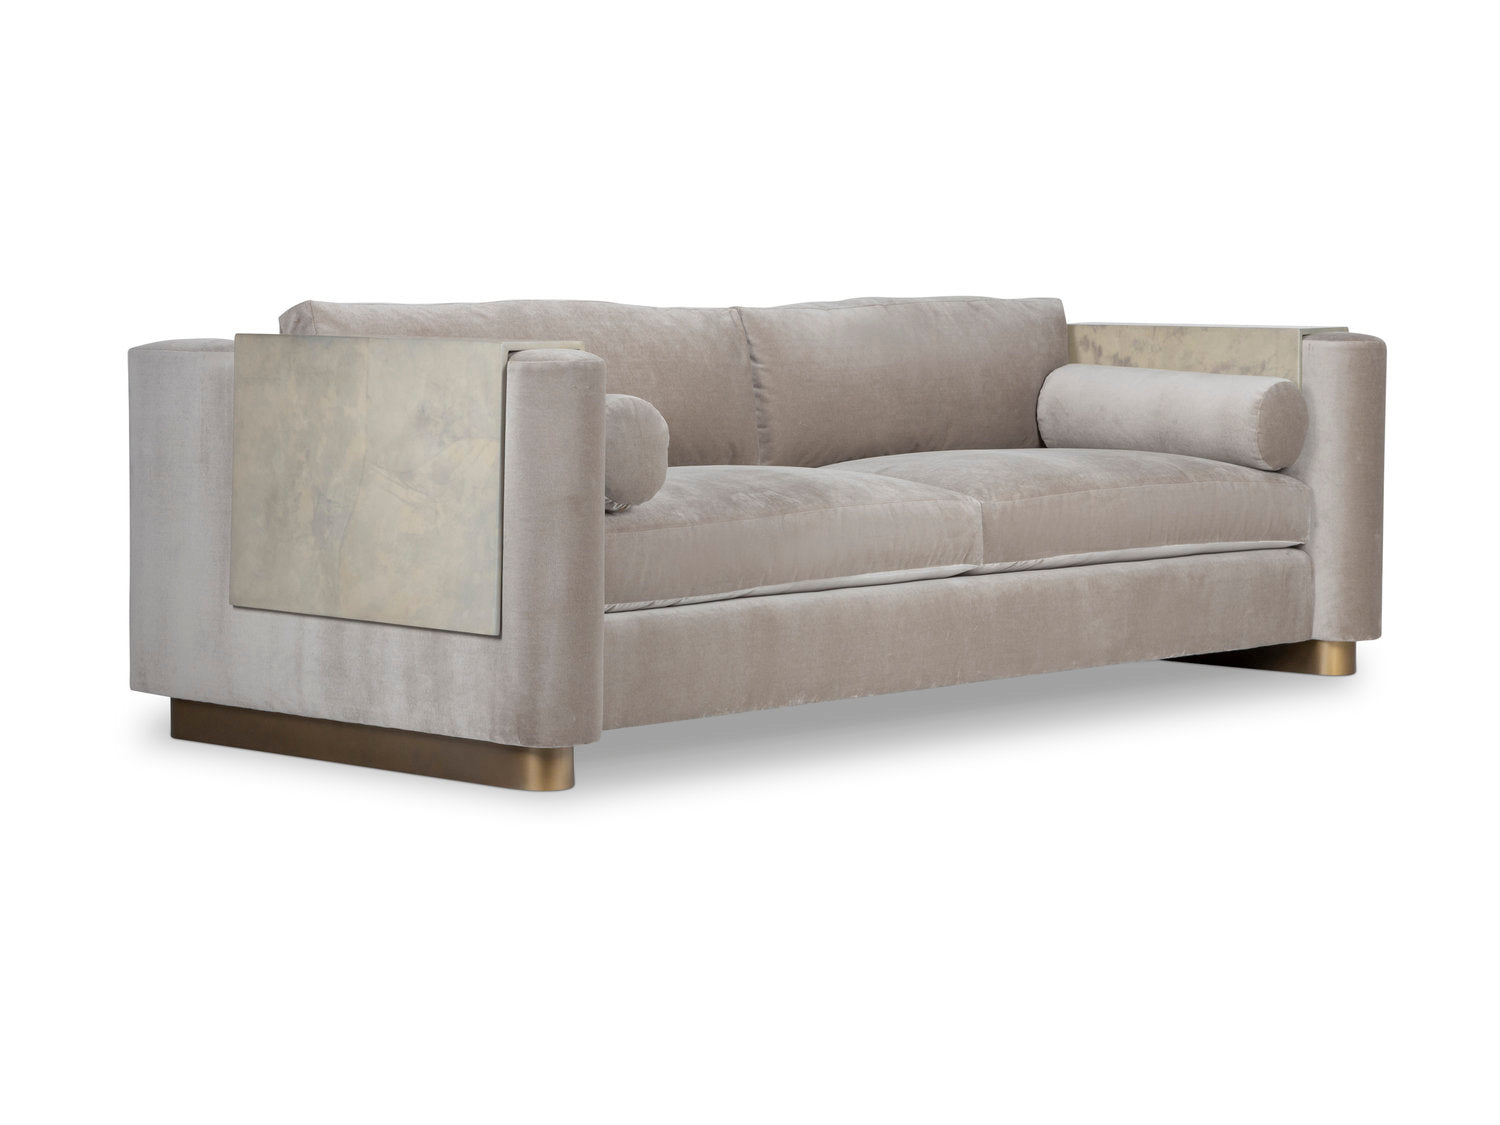 Cannes Sofa - Call For Pricing 1-800-464-1317